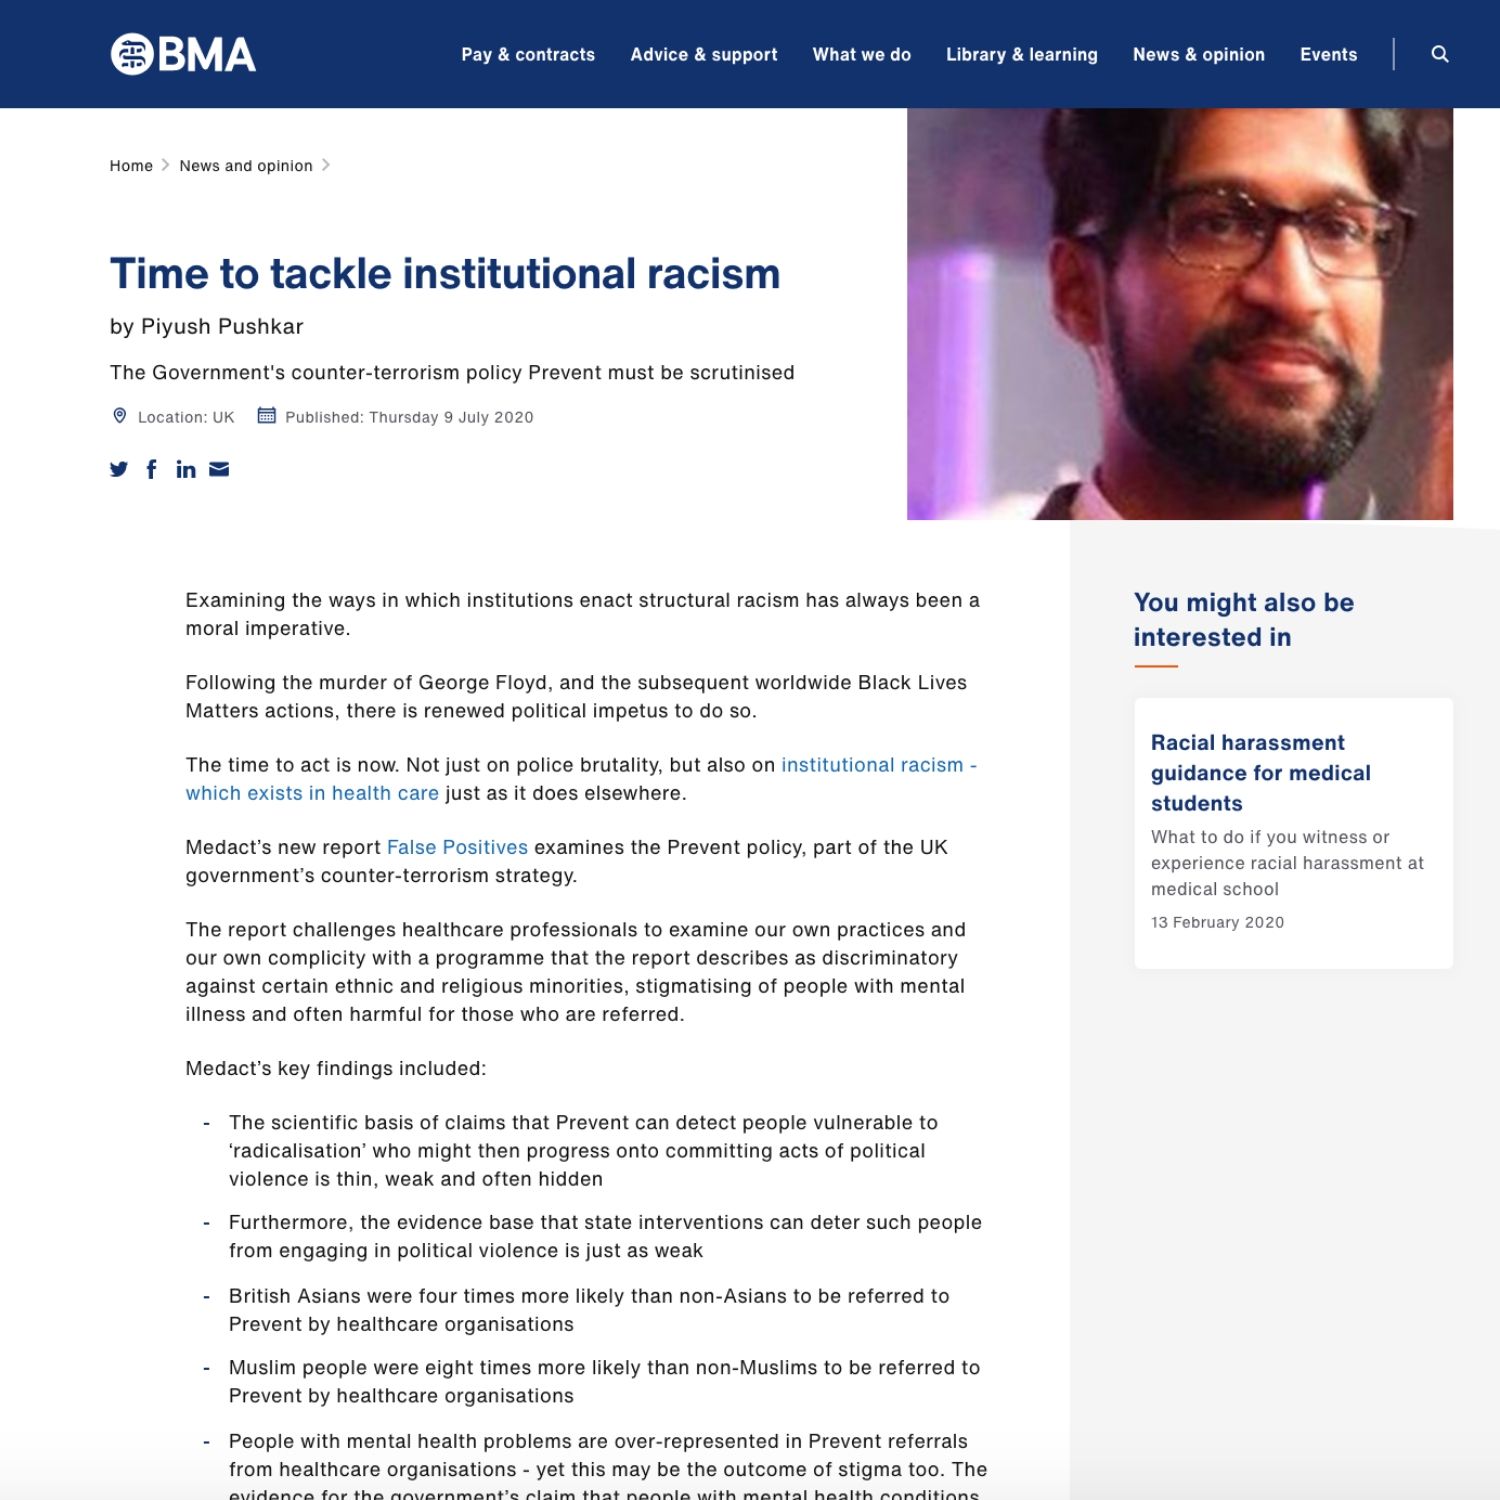 Time to tackle institutional racism